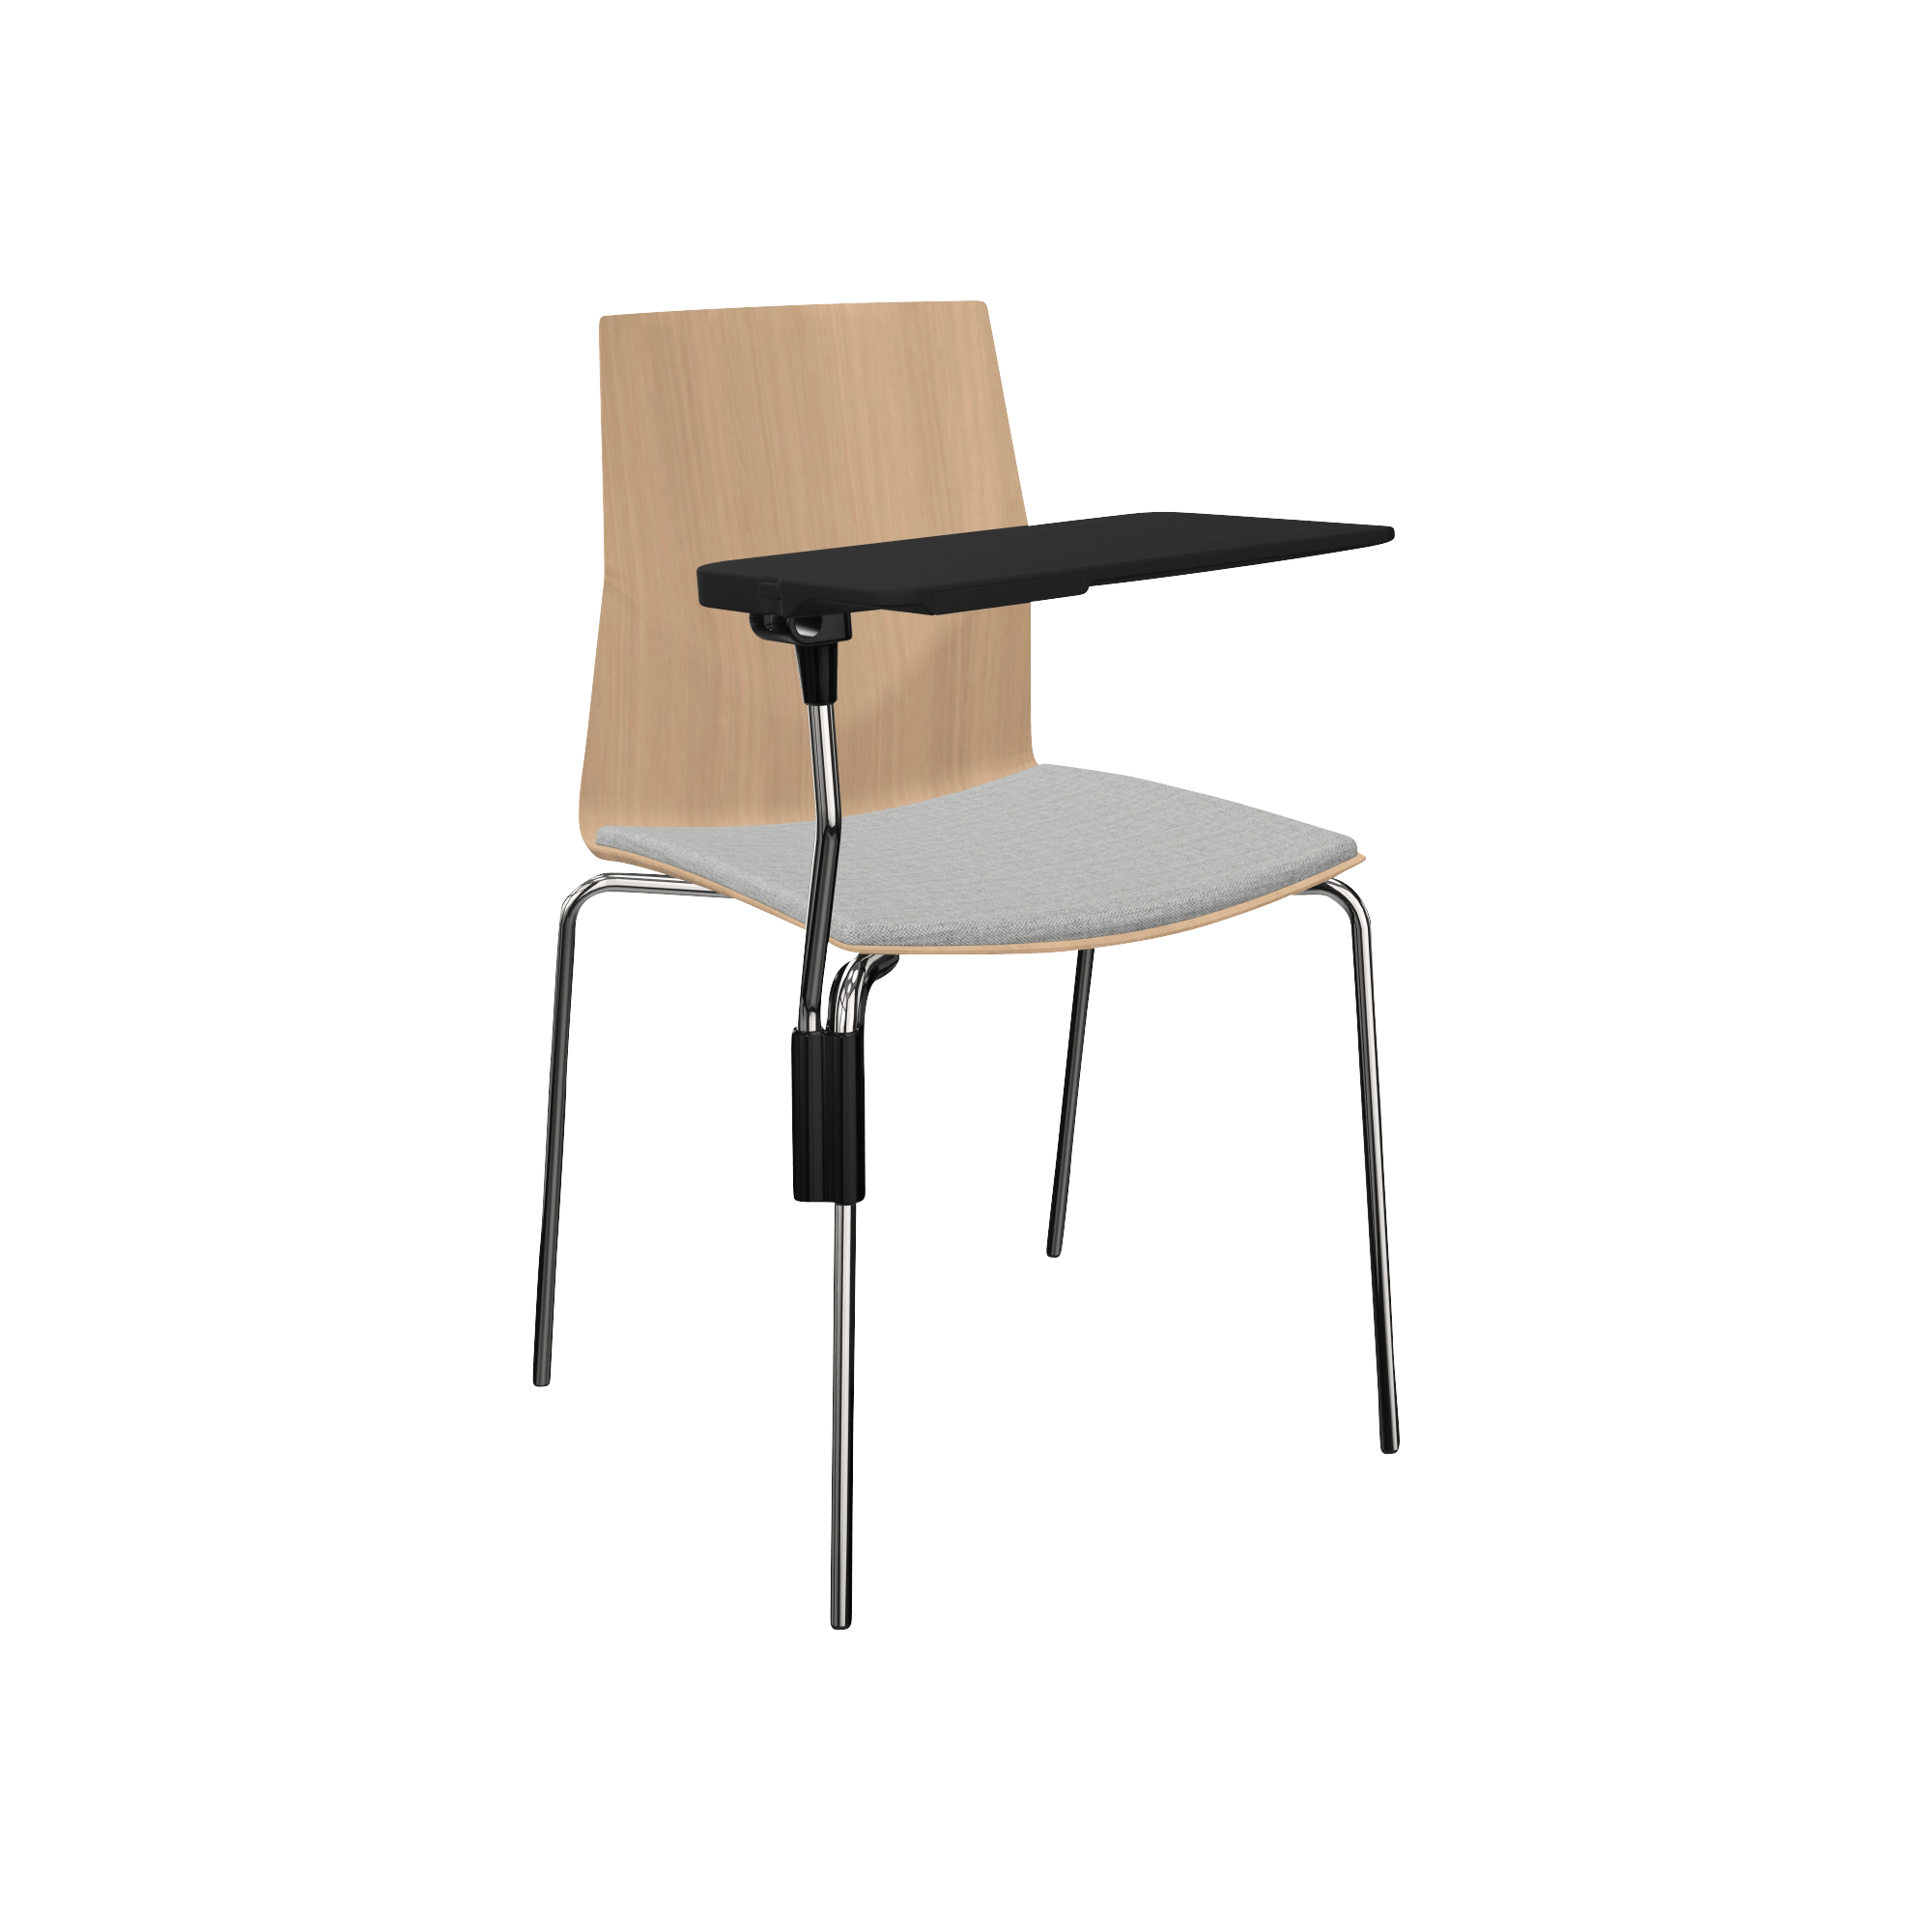 wooden designer office chair with metal legs with tray